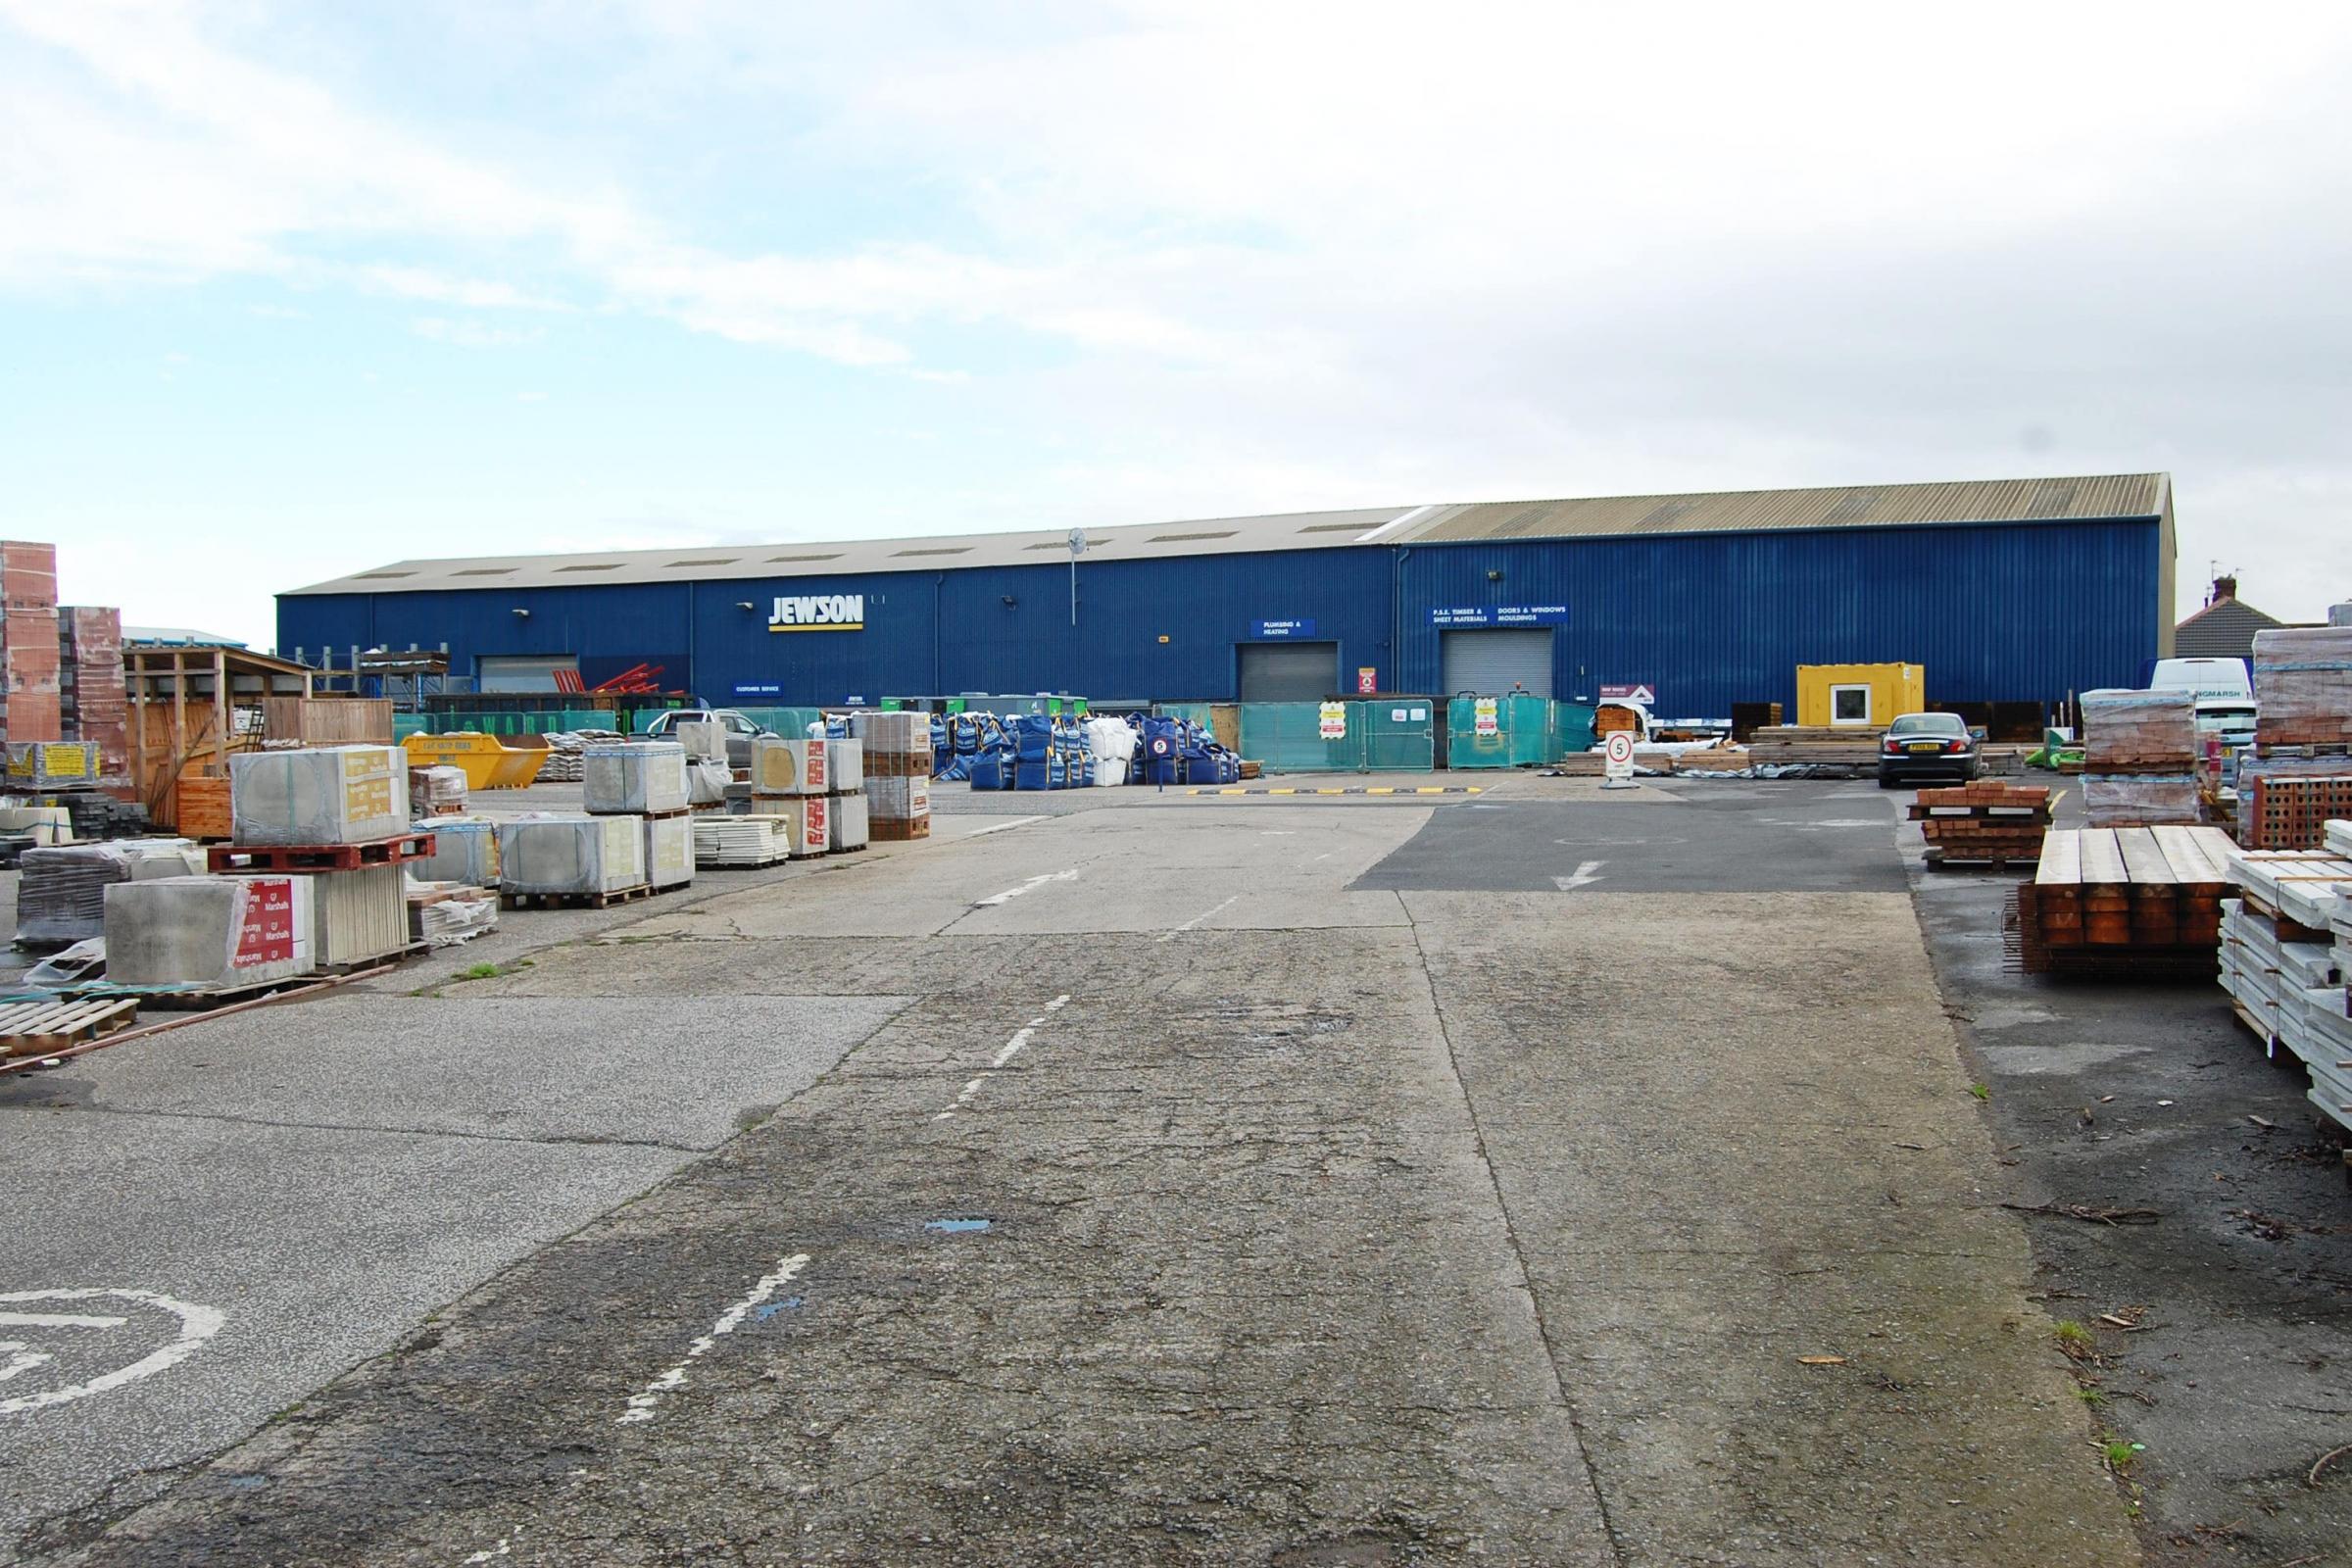 Jewson owner fined £400,000 over asbestos failures Glasgow Times picture